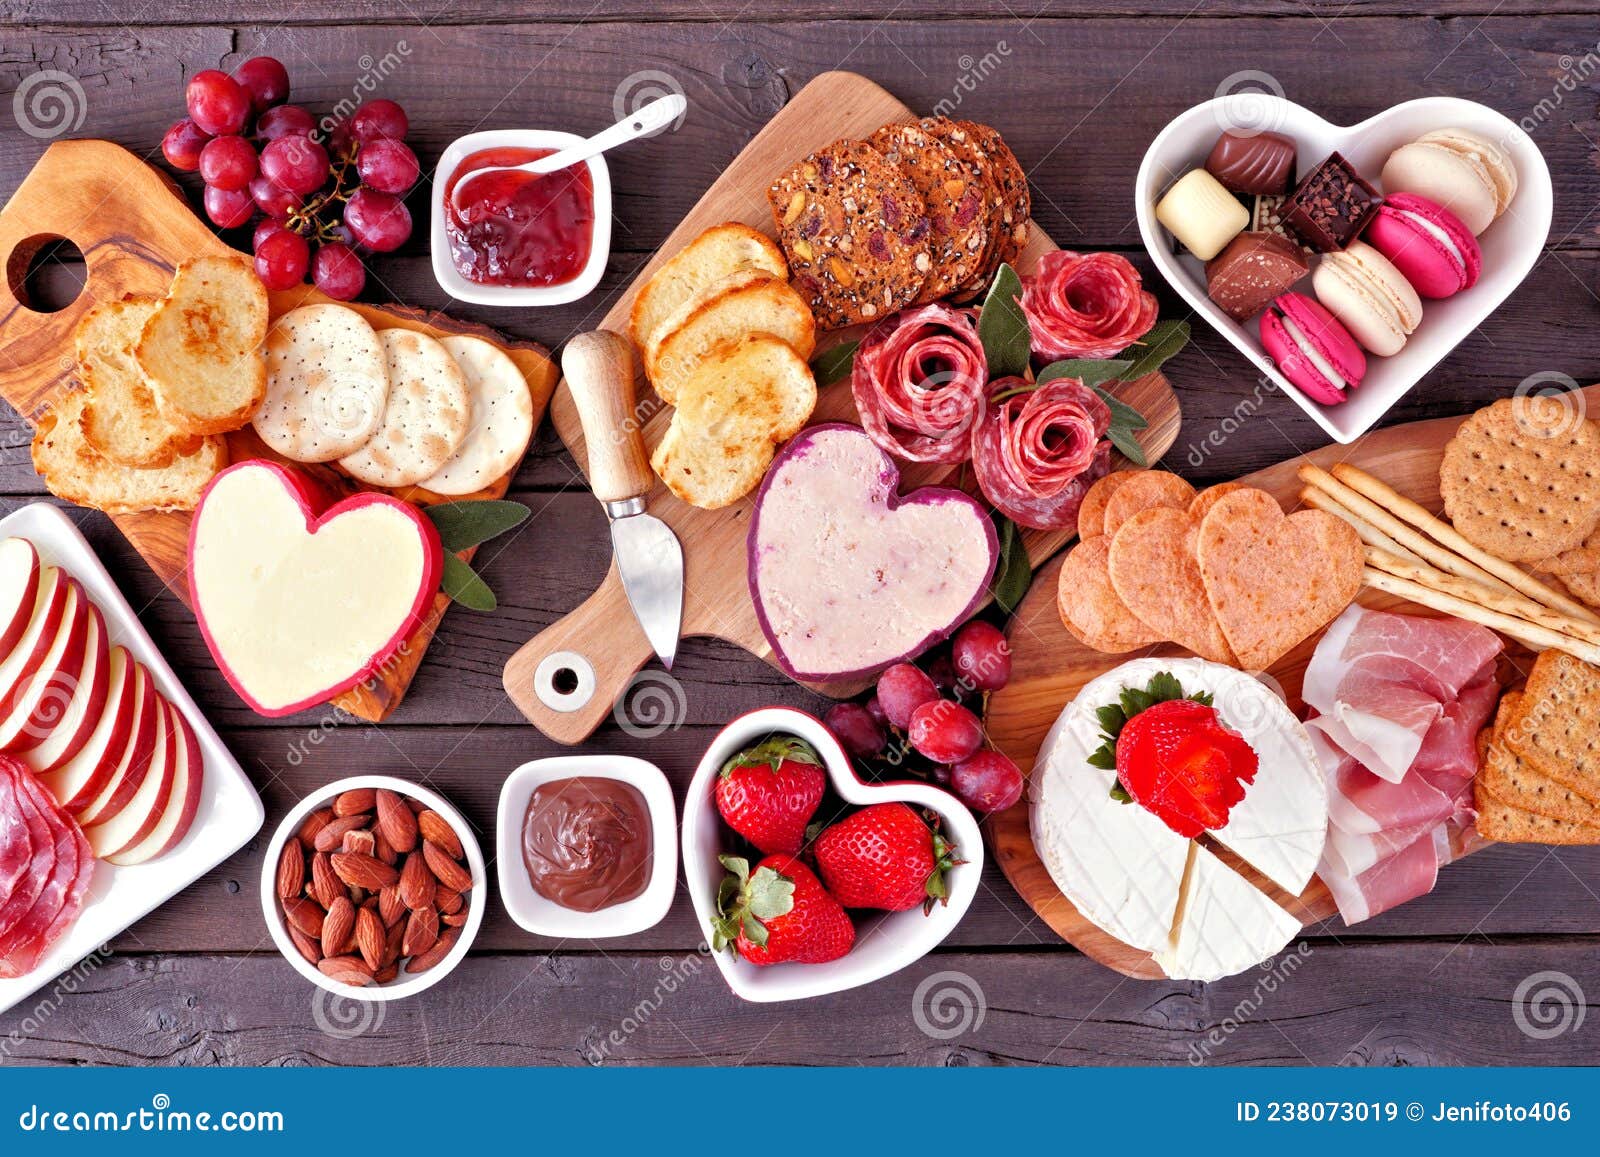 valentines day charcuterie table scene